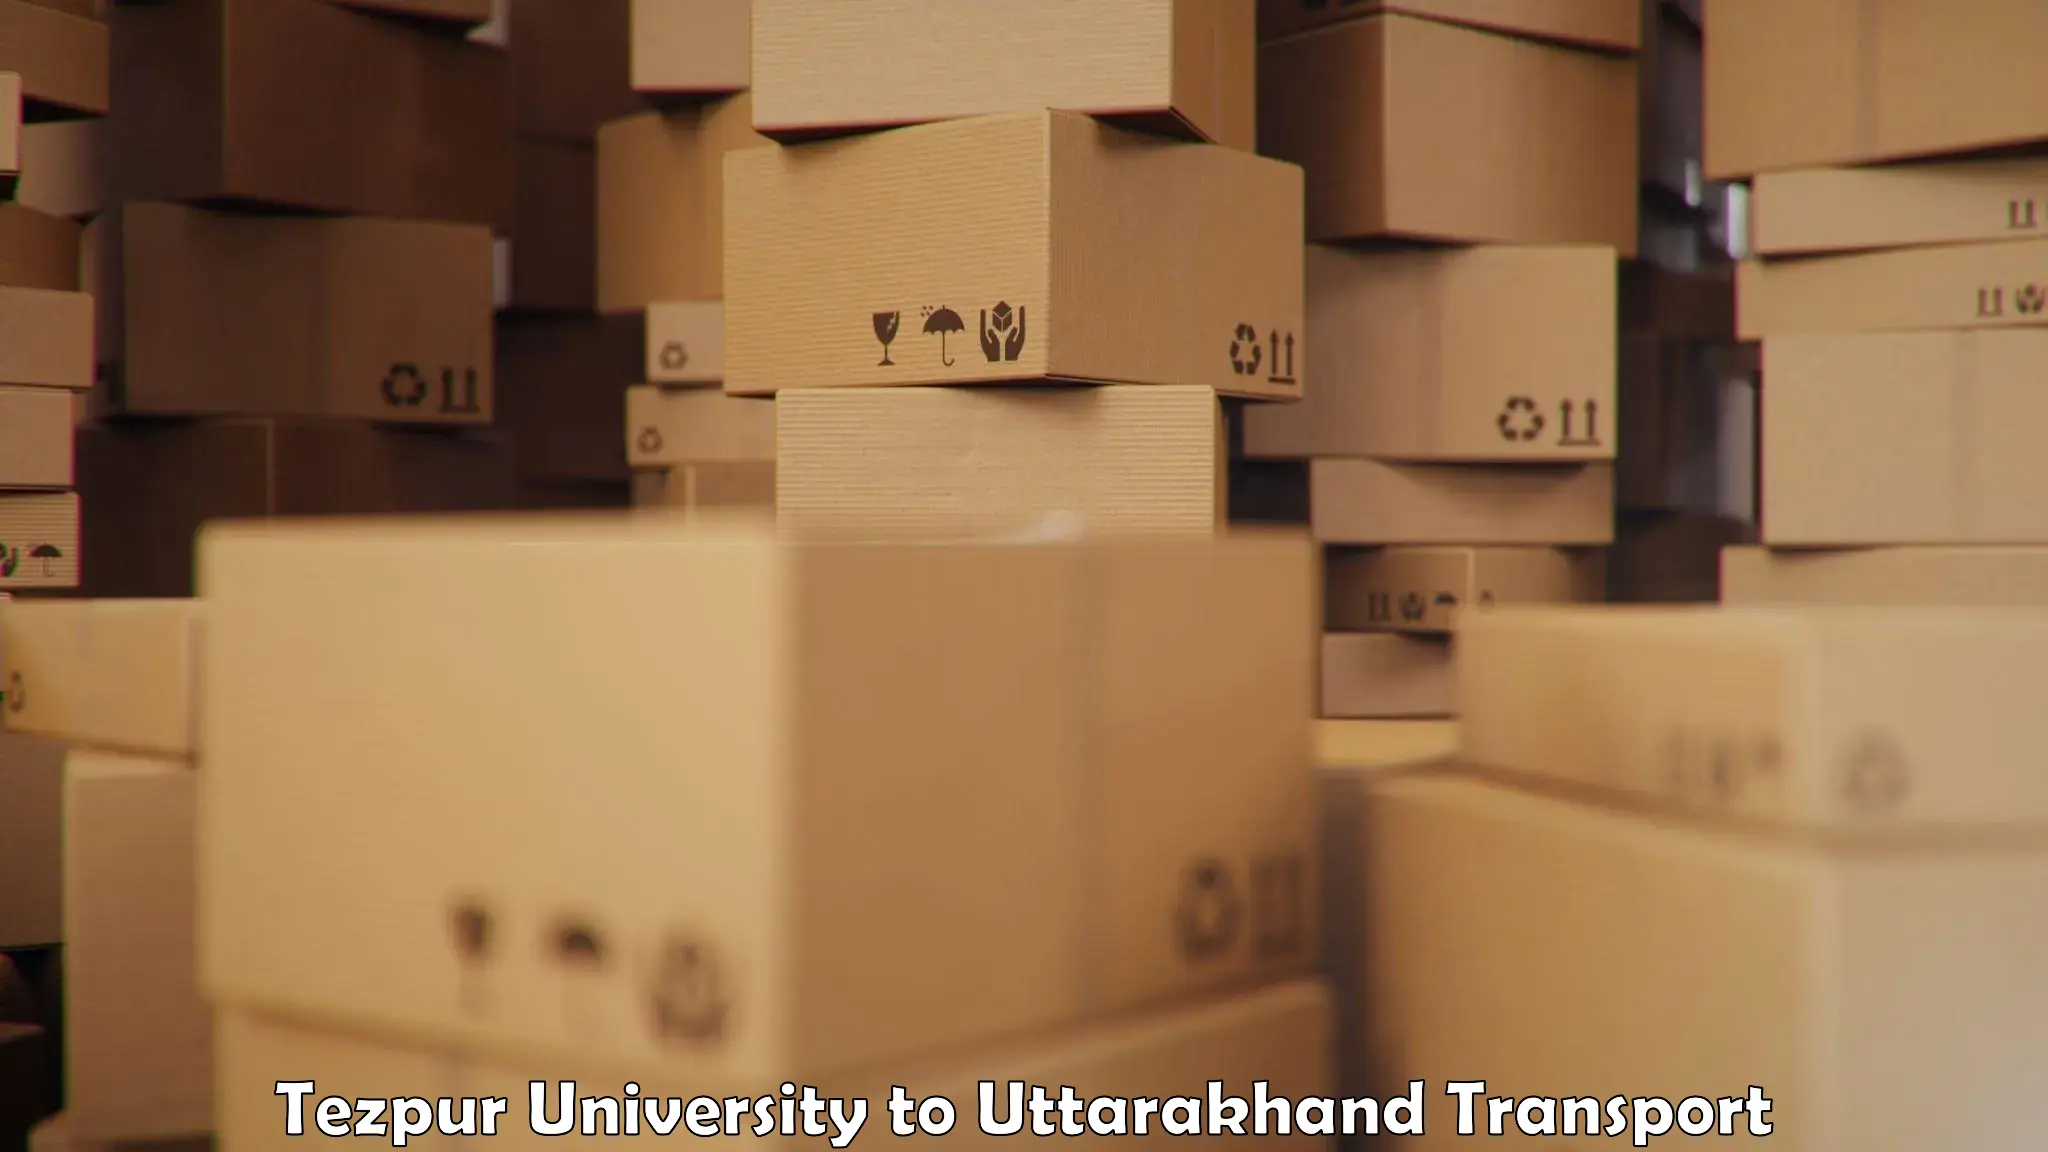 Container transport service Tezpur University to Doiwala